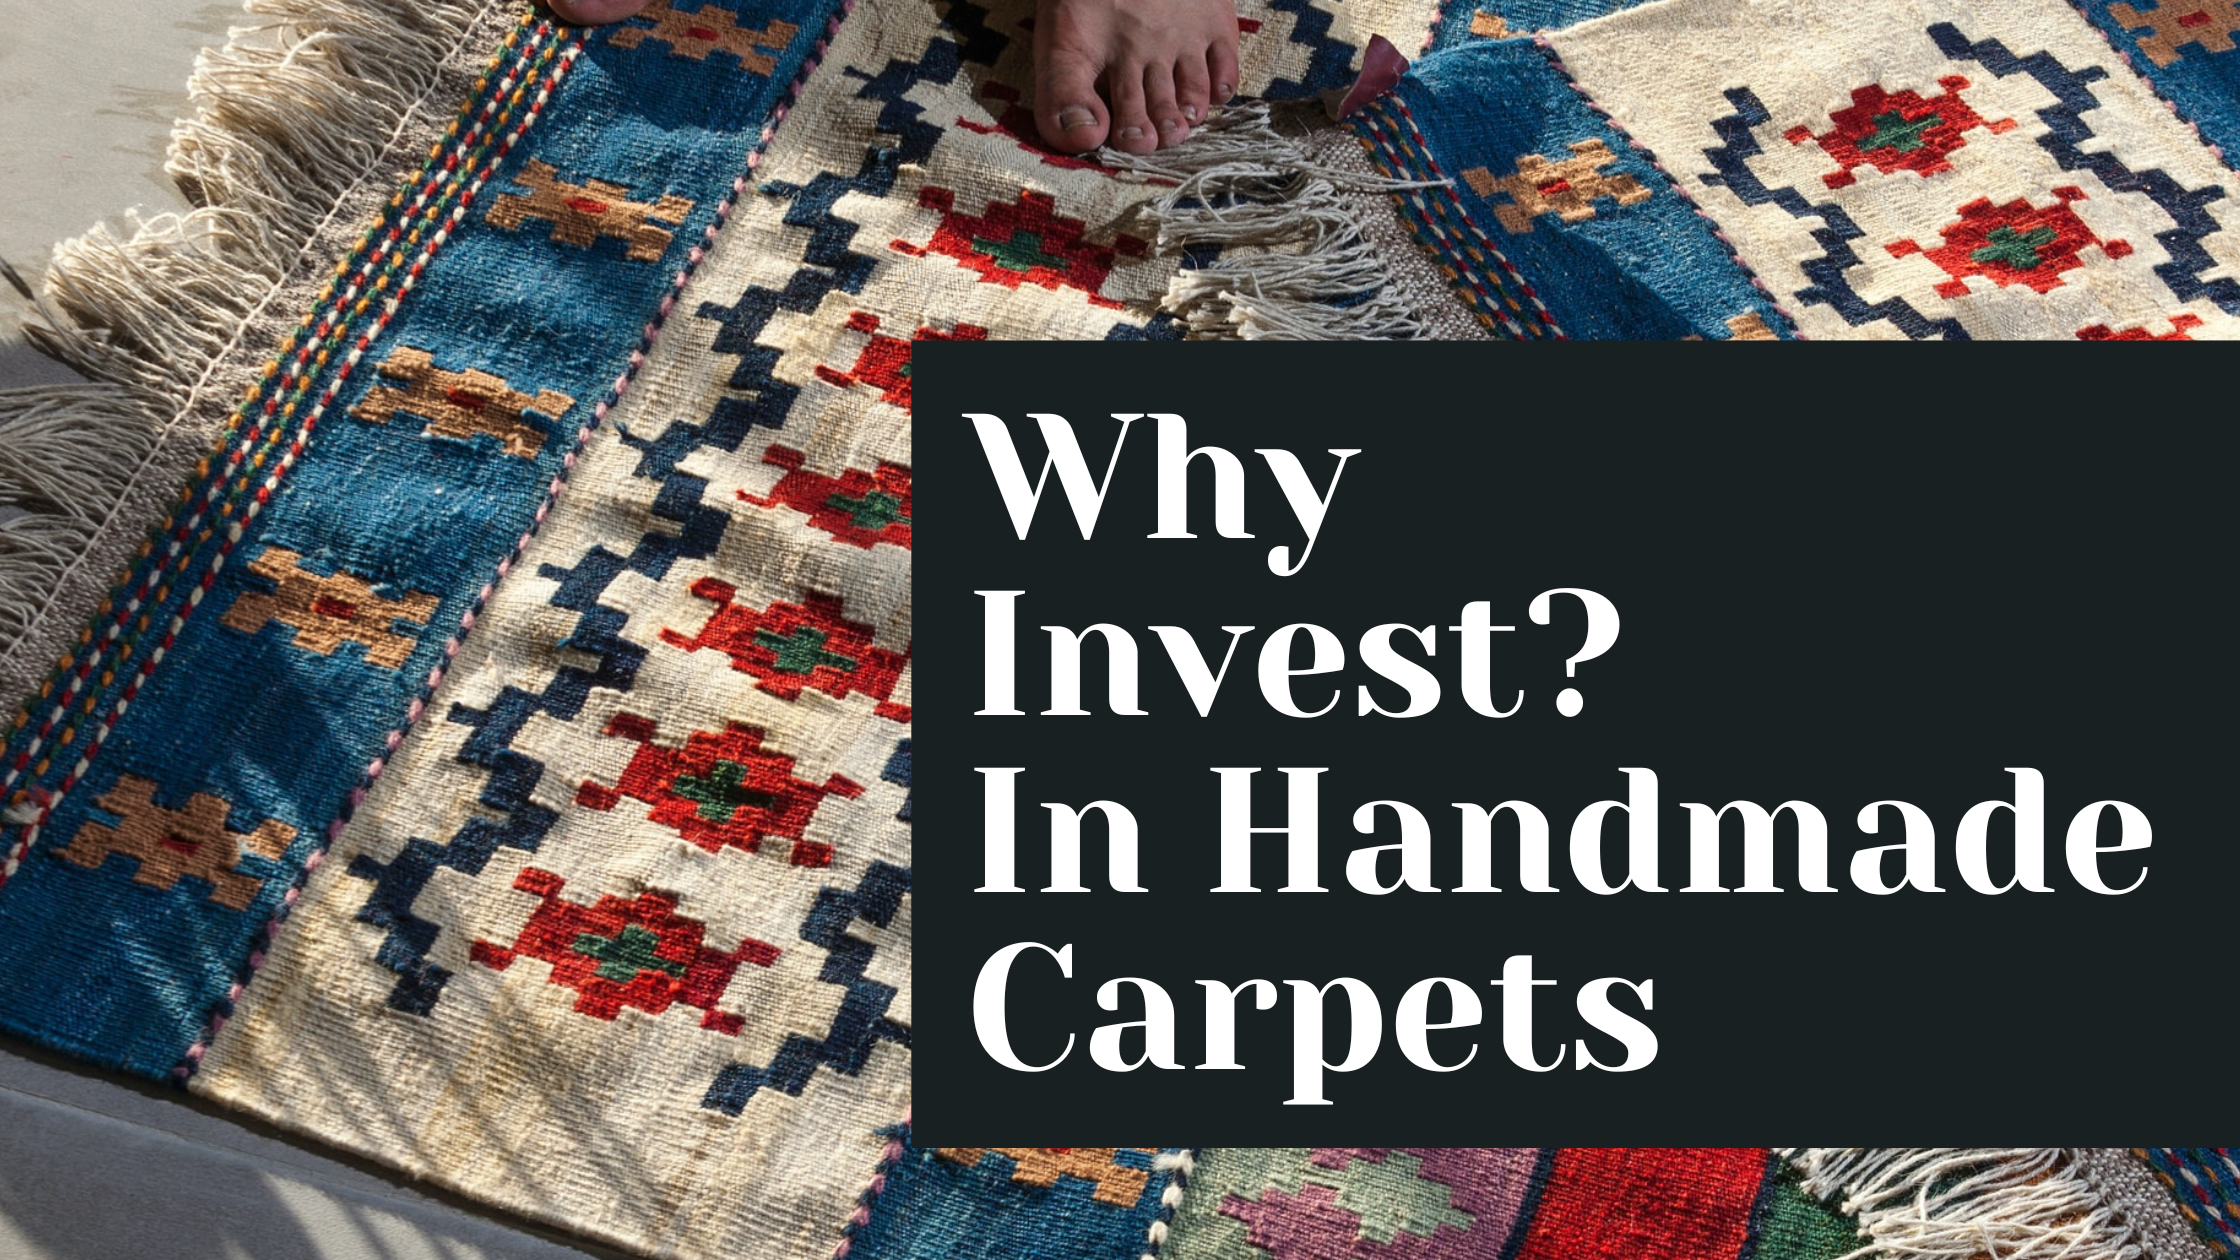 Why Invest in a Handmade Carpet? Unraveling the 21 Surprising Benefits